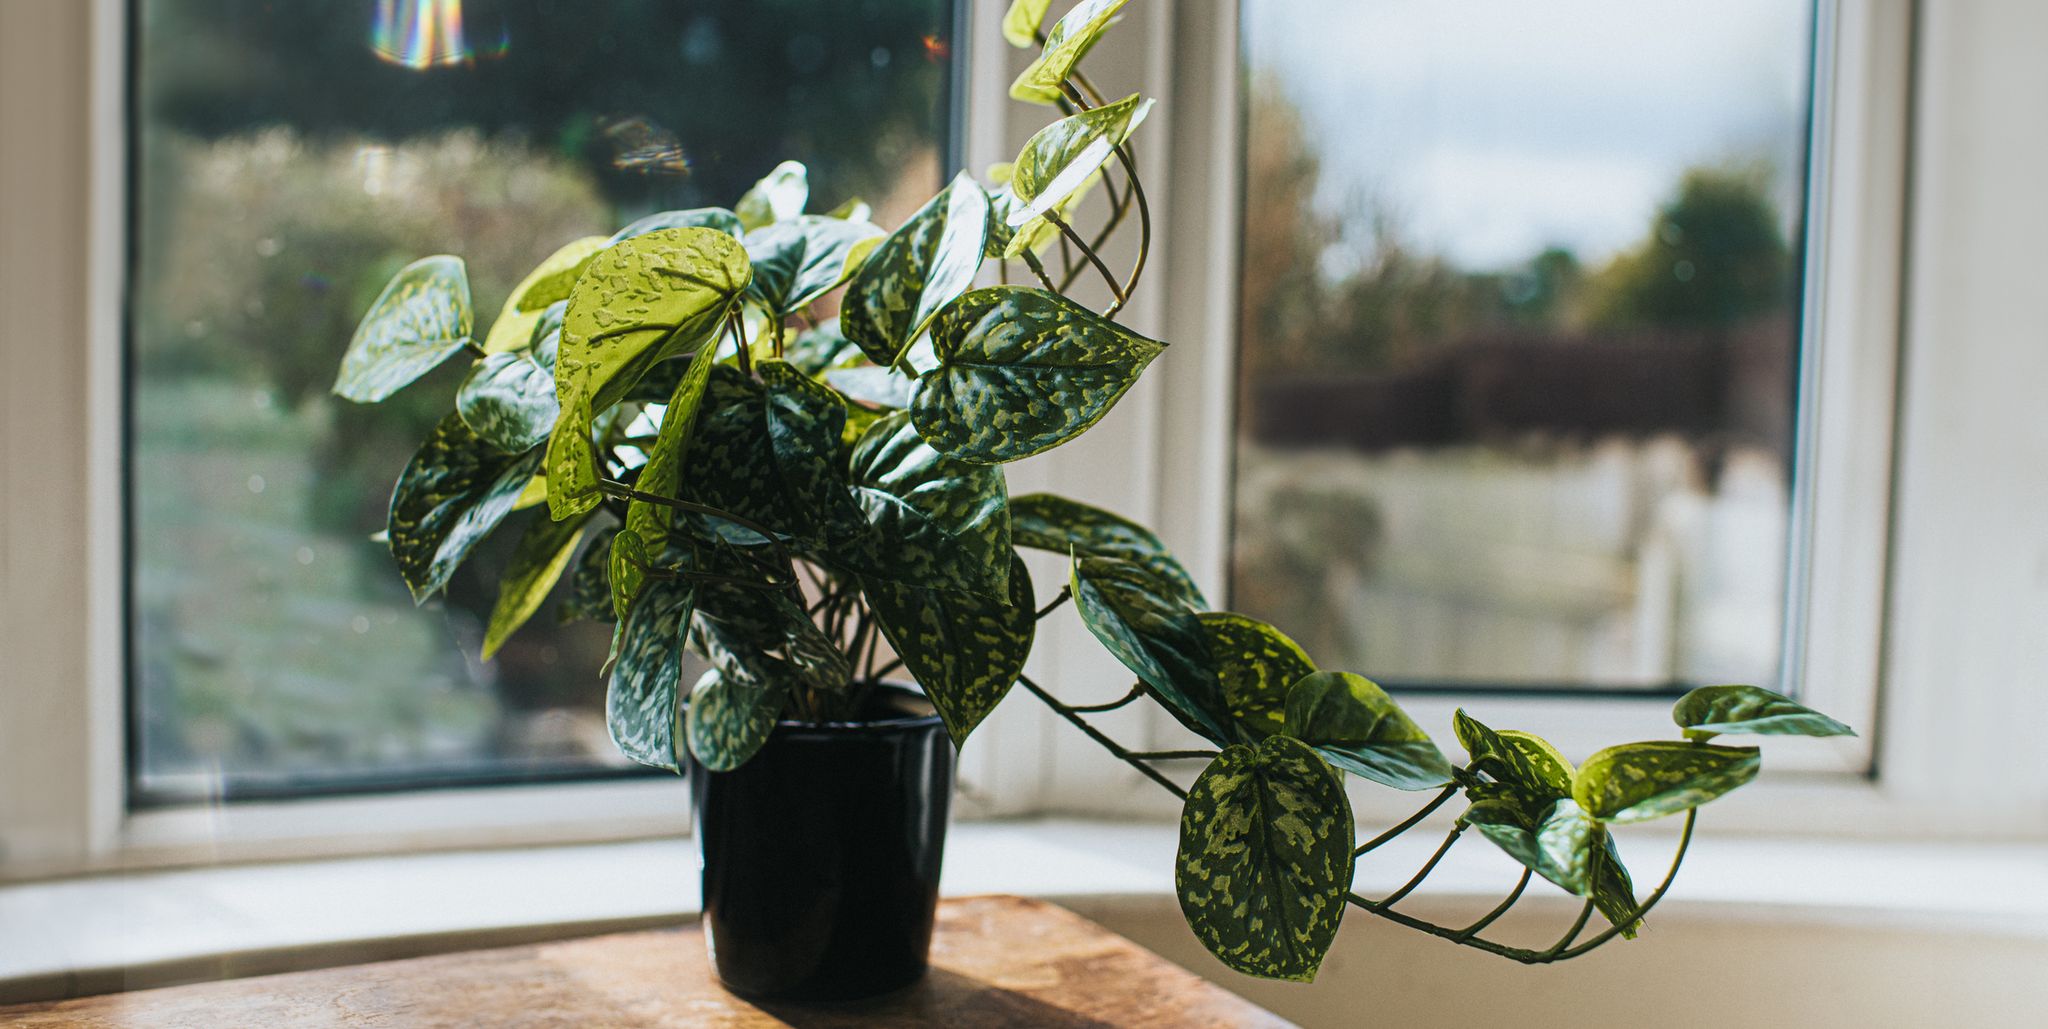 How to care for artificial plants